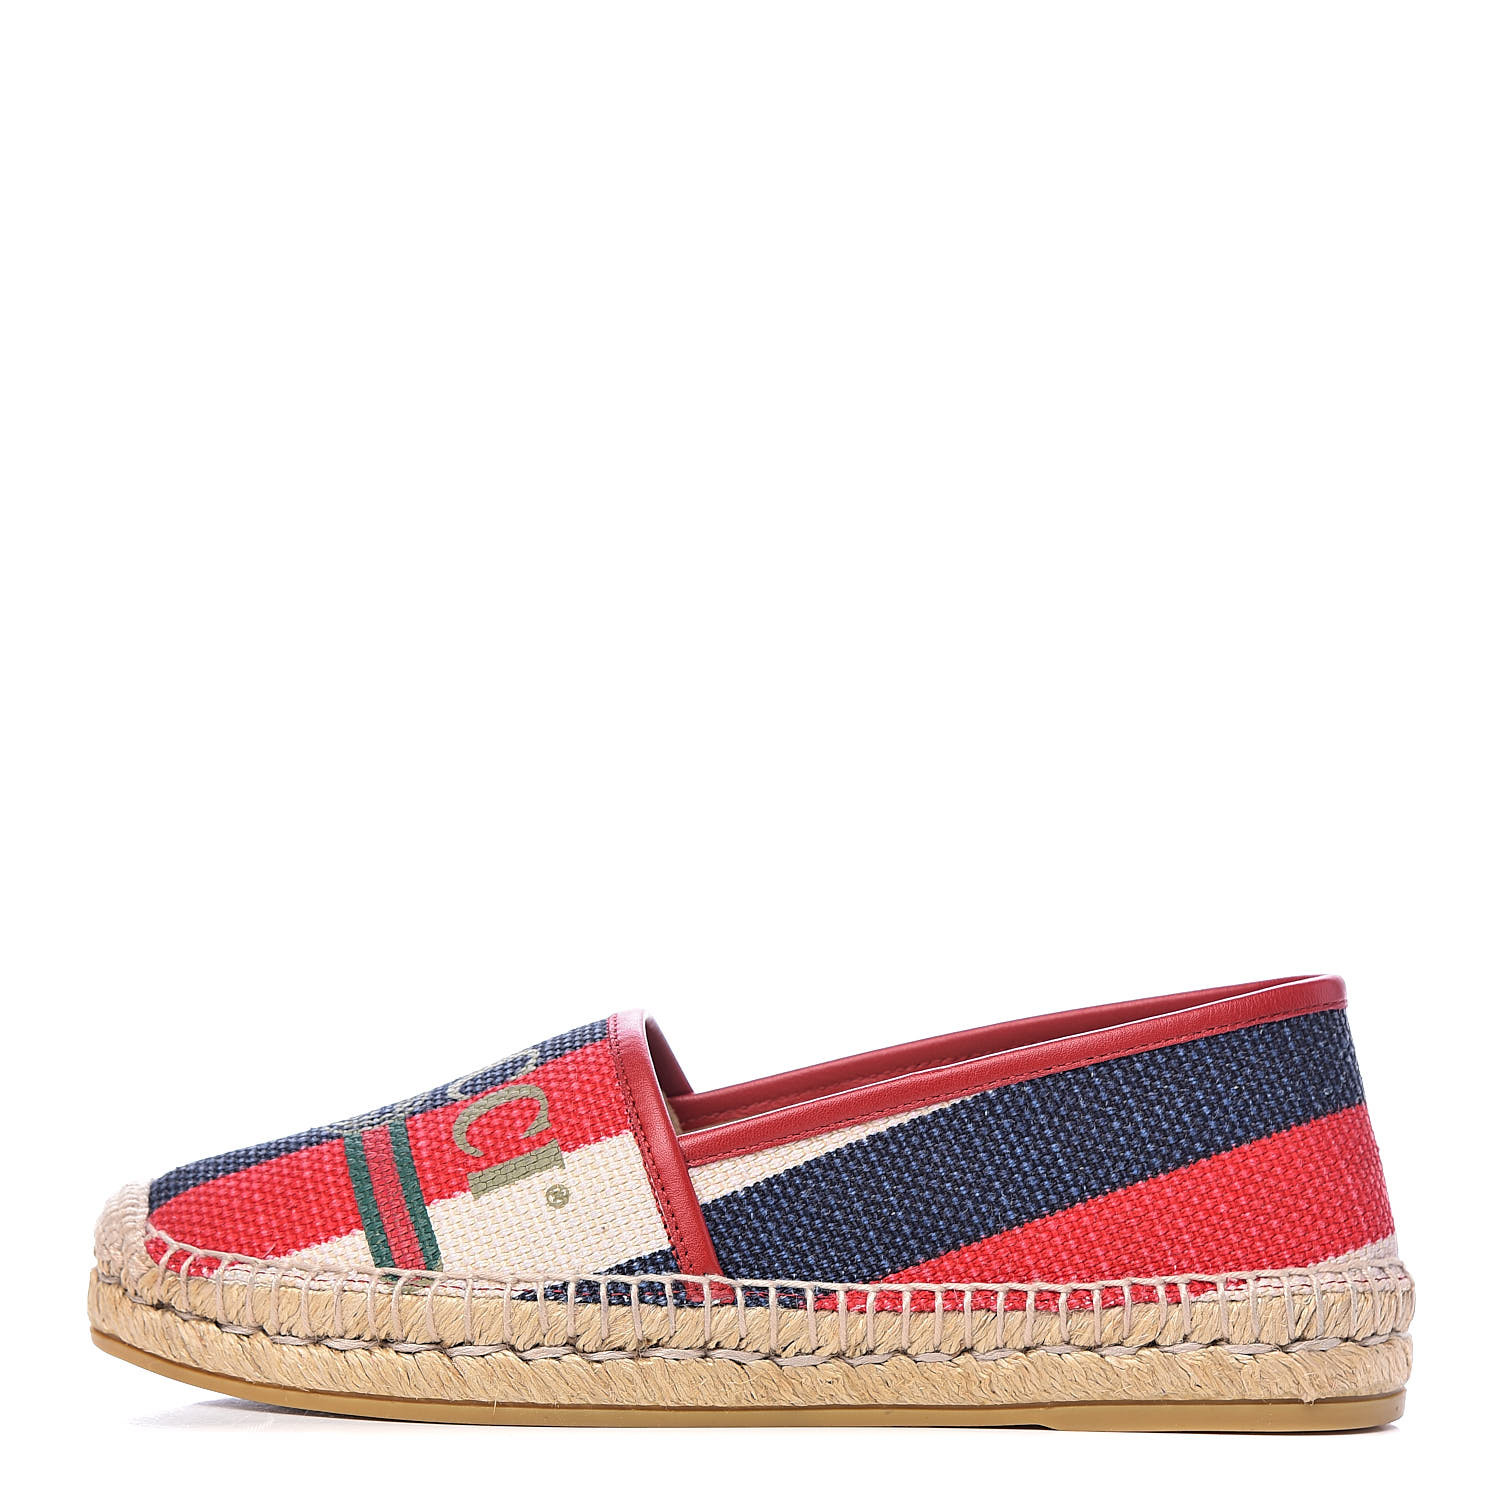 blue and white striped espadrilles